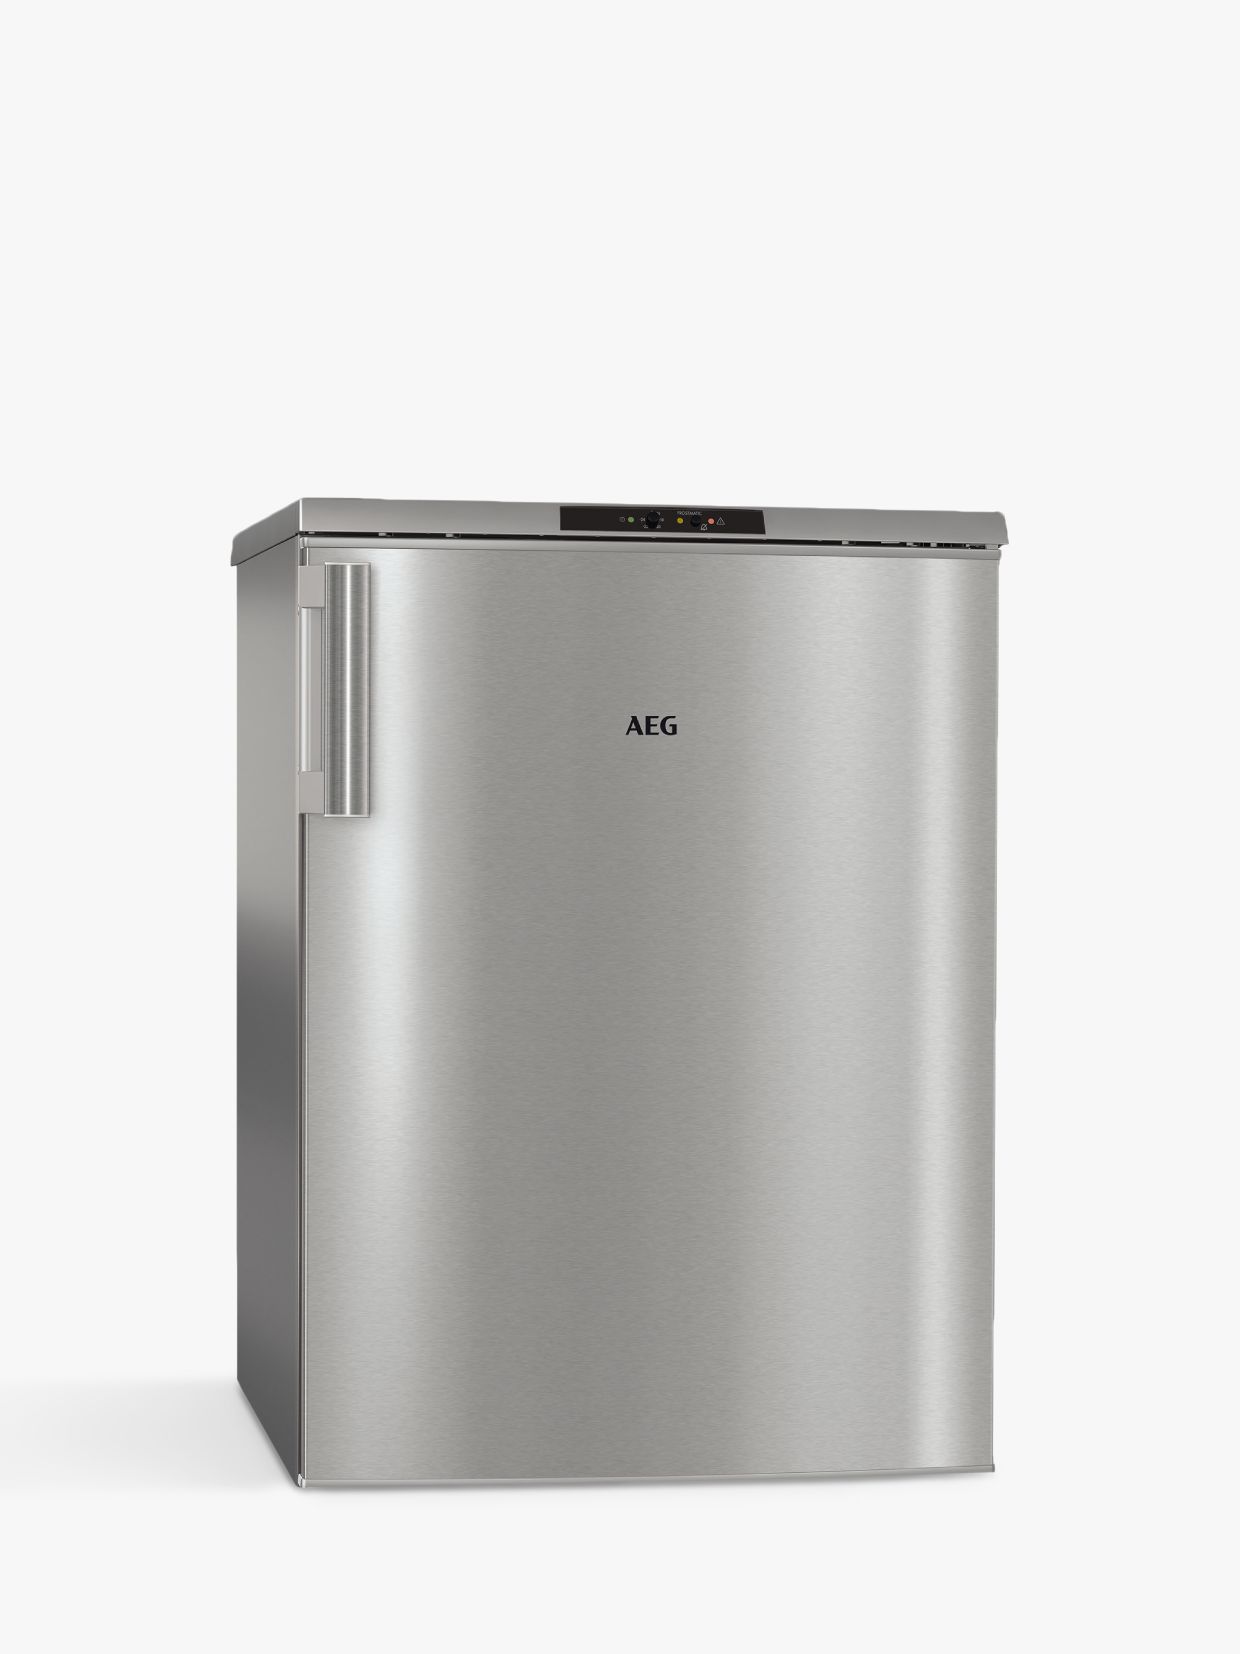 AEG ATB8112VAX Freestanding Freezer, A++ Energy Rating, 59cm Wide, Silver